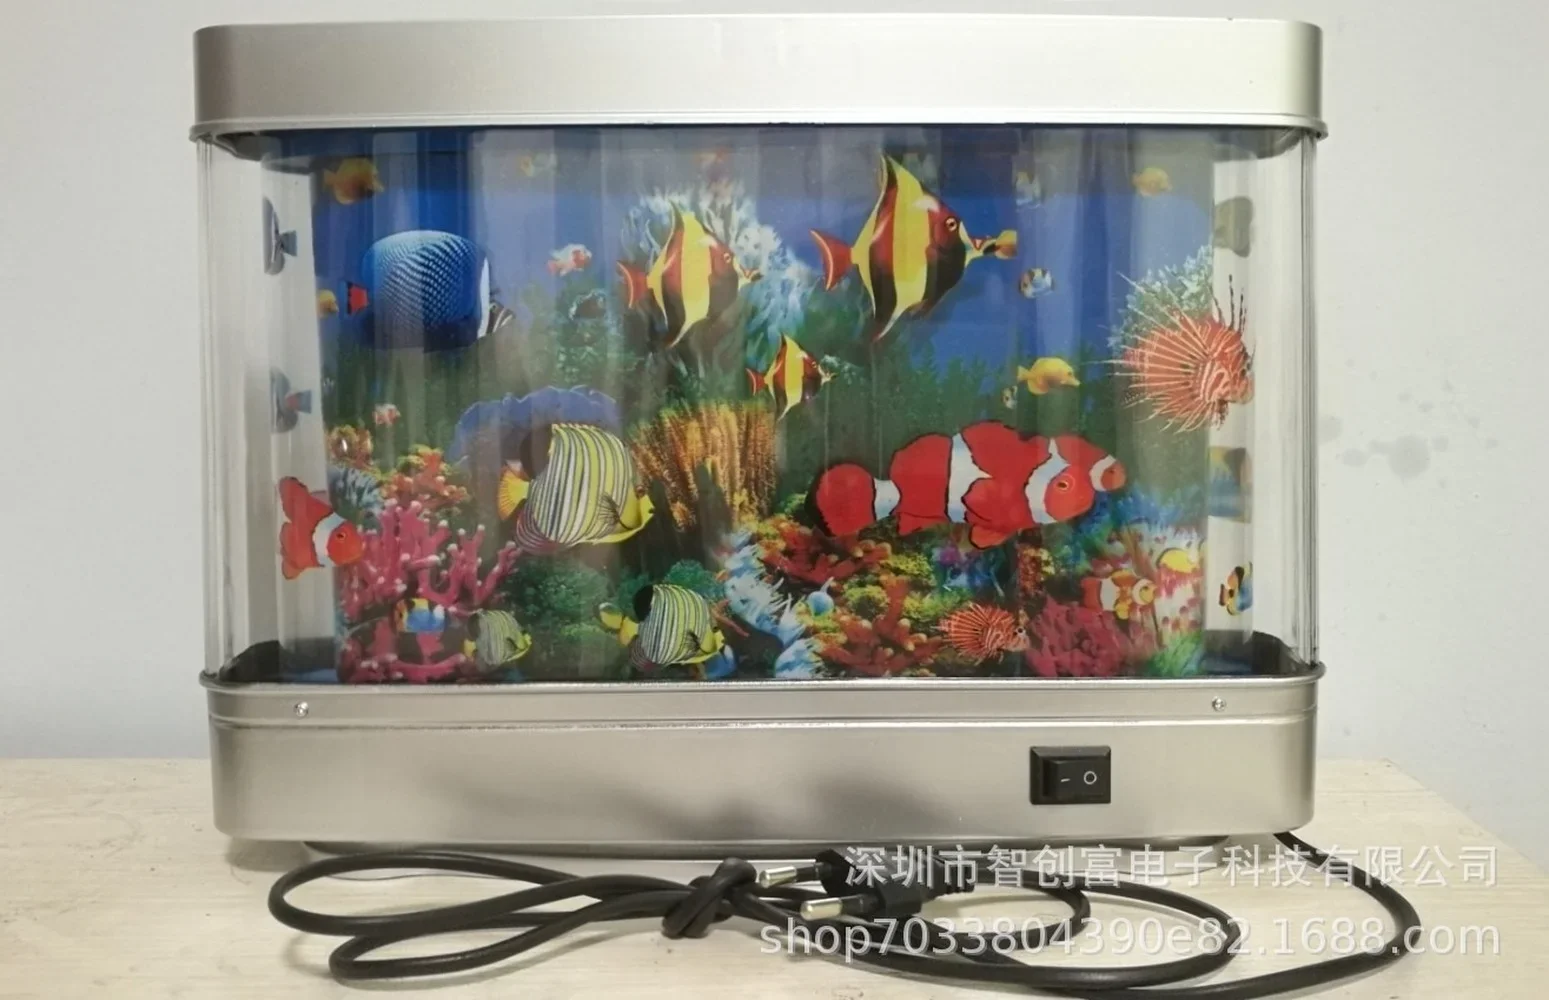 Artificial Tropical Fish Aquarium Decorative Lights Mobile Virtual Ocean LED Lights with Switch Colorful Lights